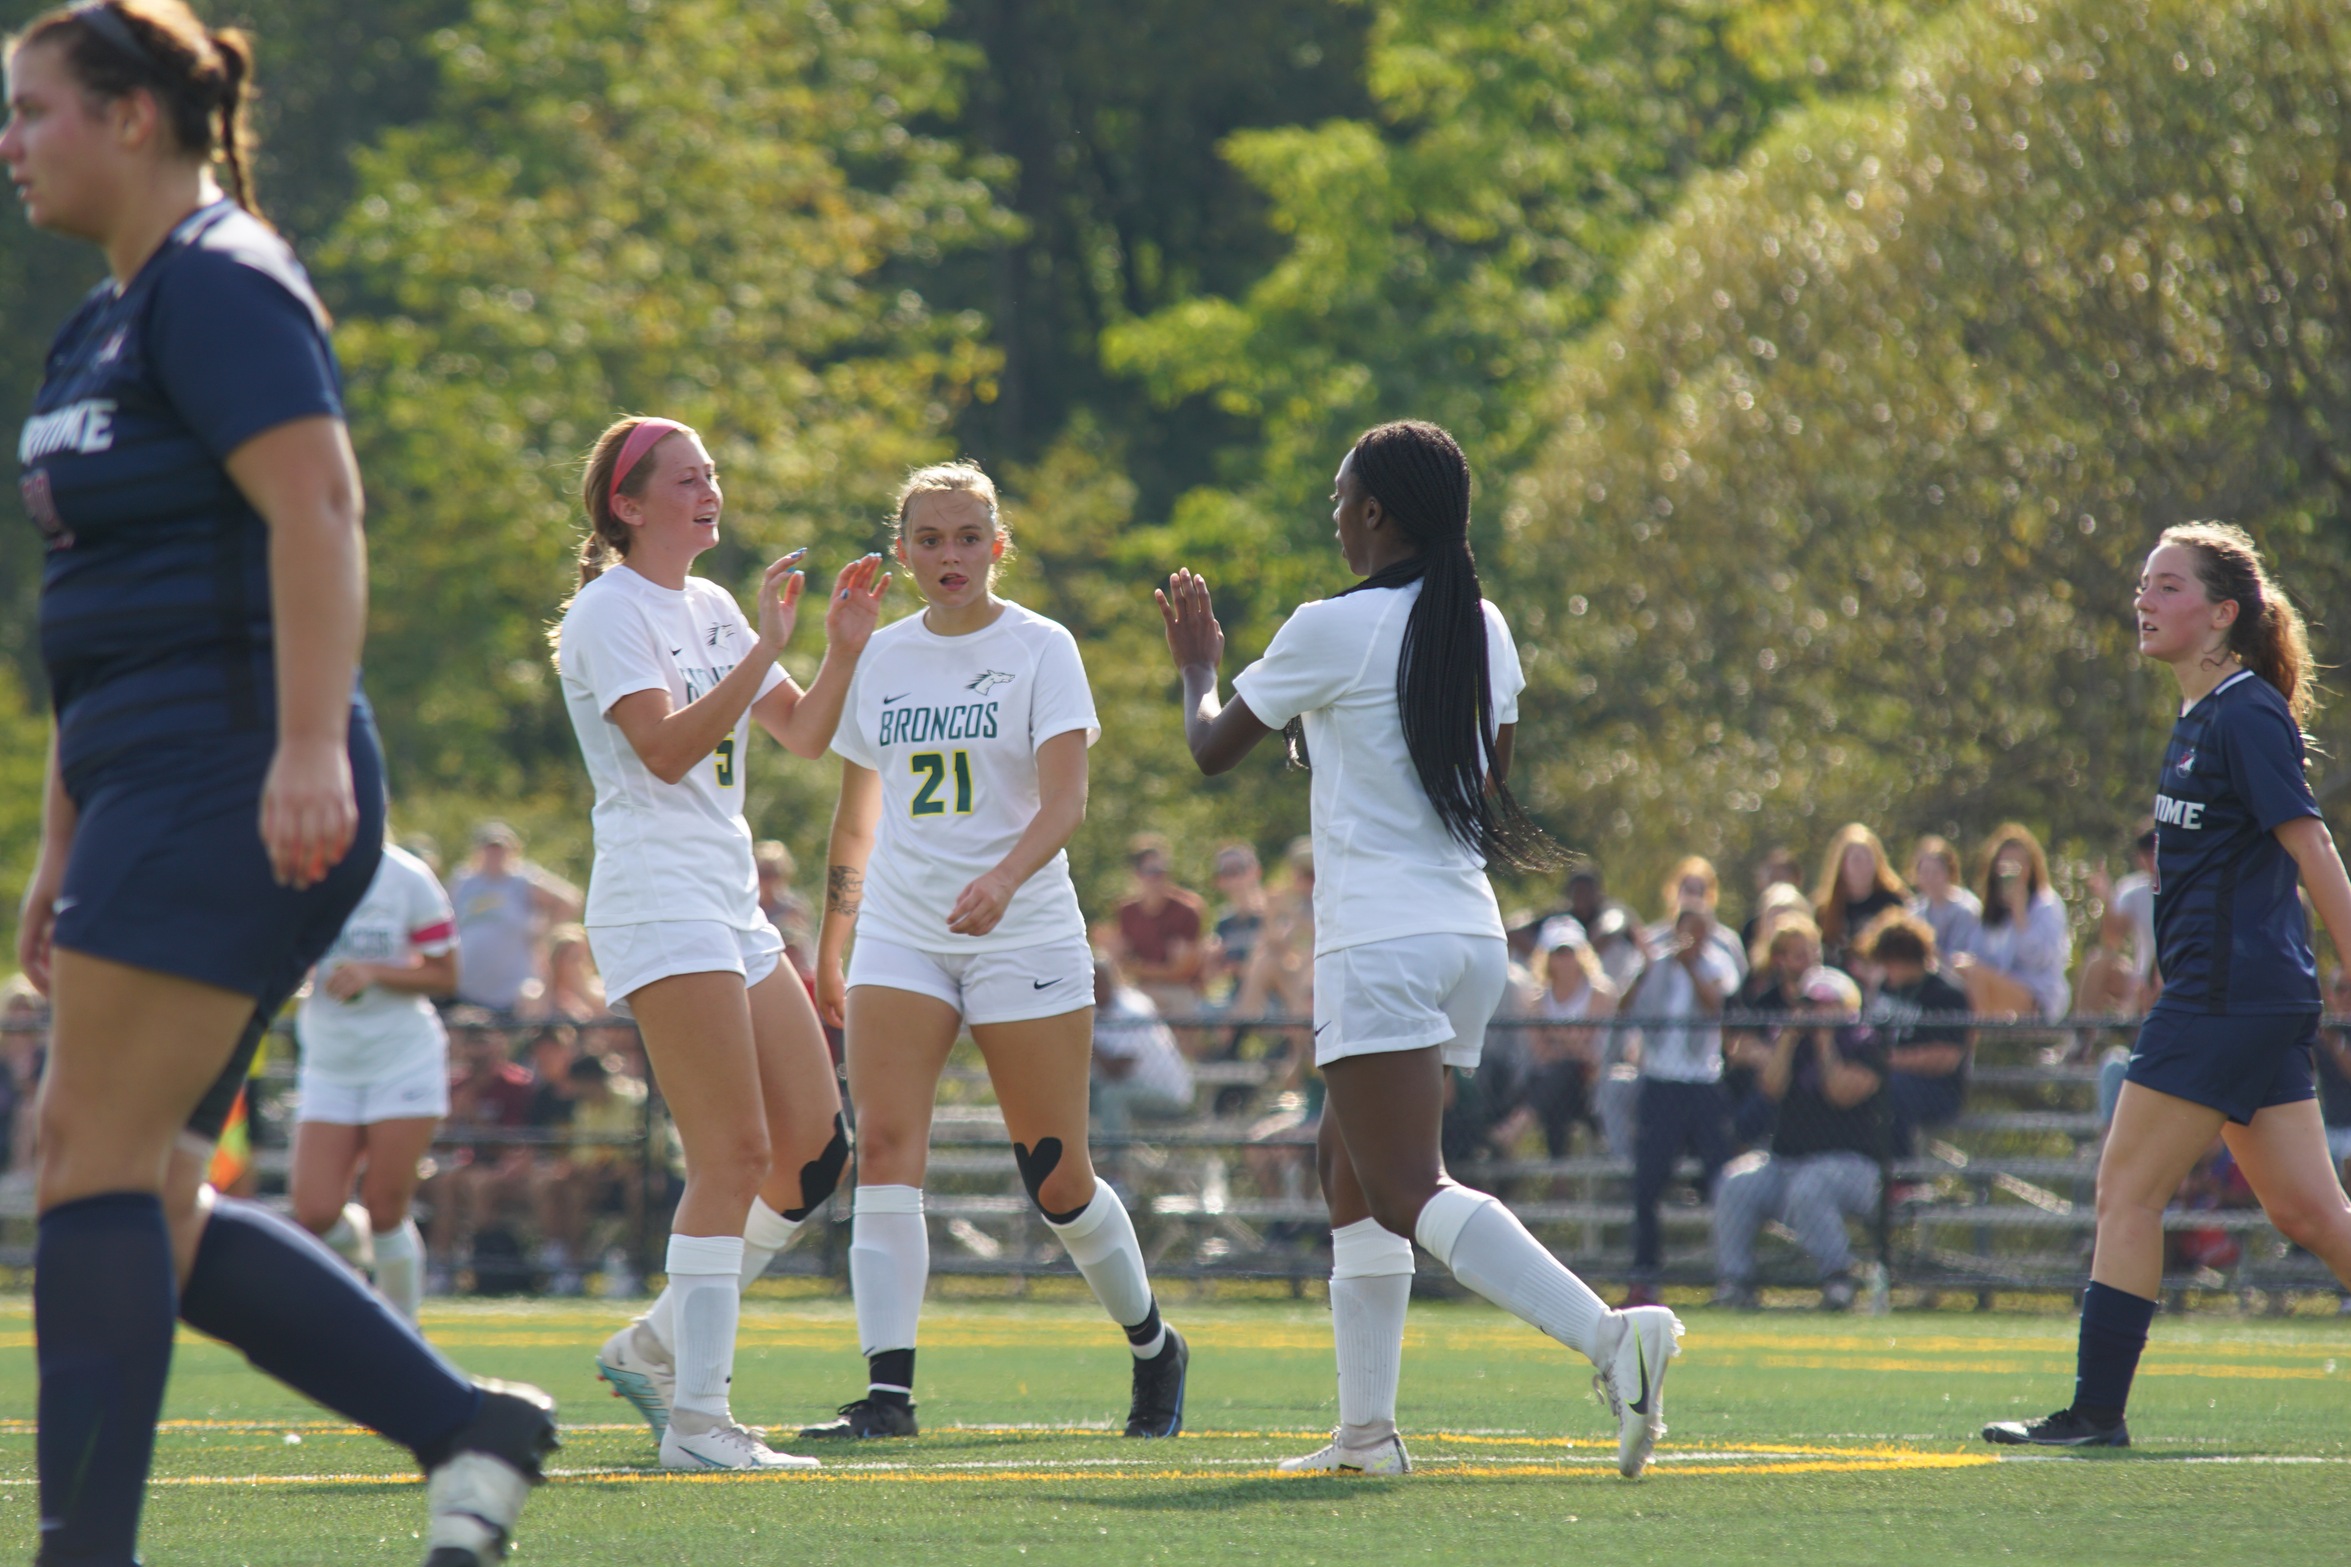 Late Shaniyah Myers goal seals Delhi's victory over NAC opponent SUNY Canton